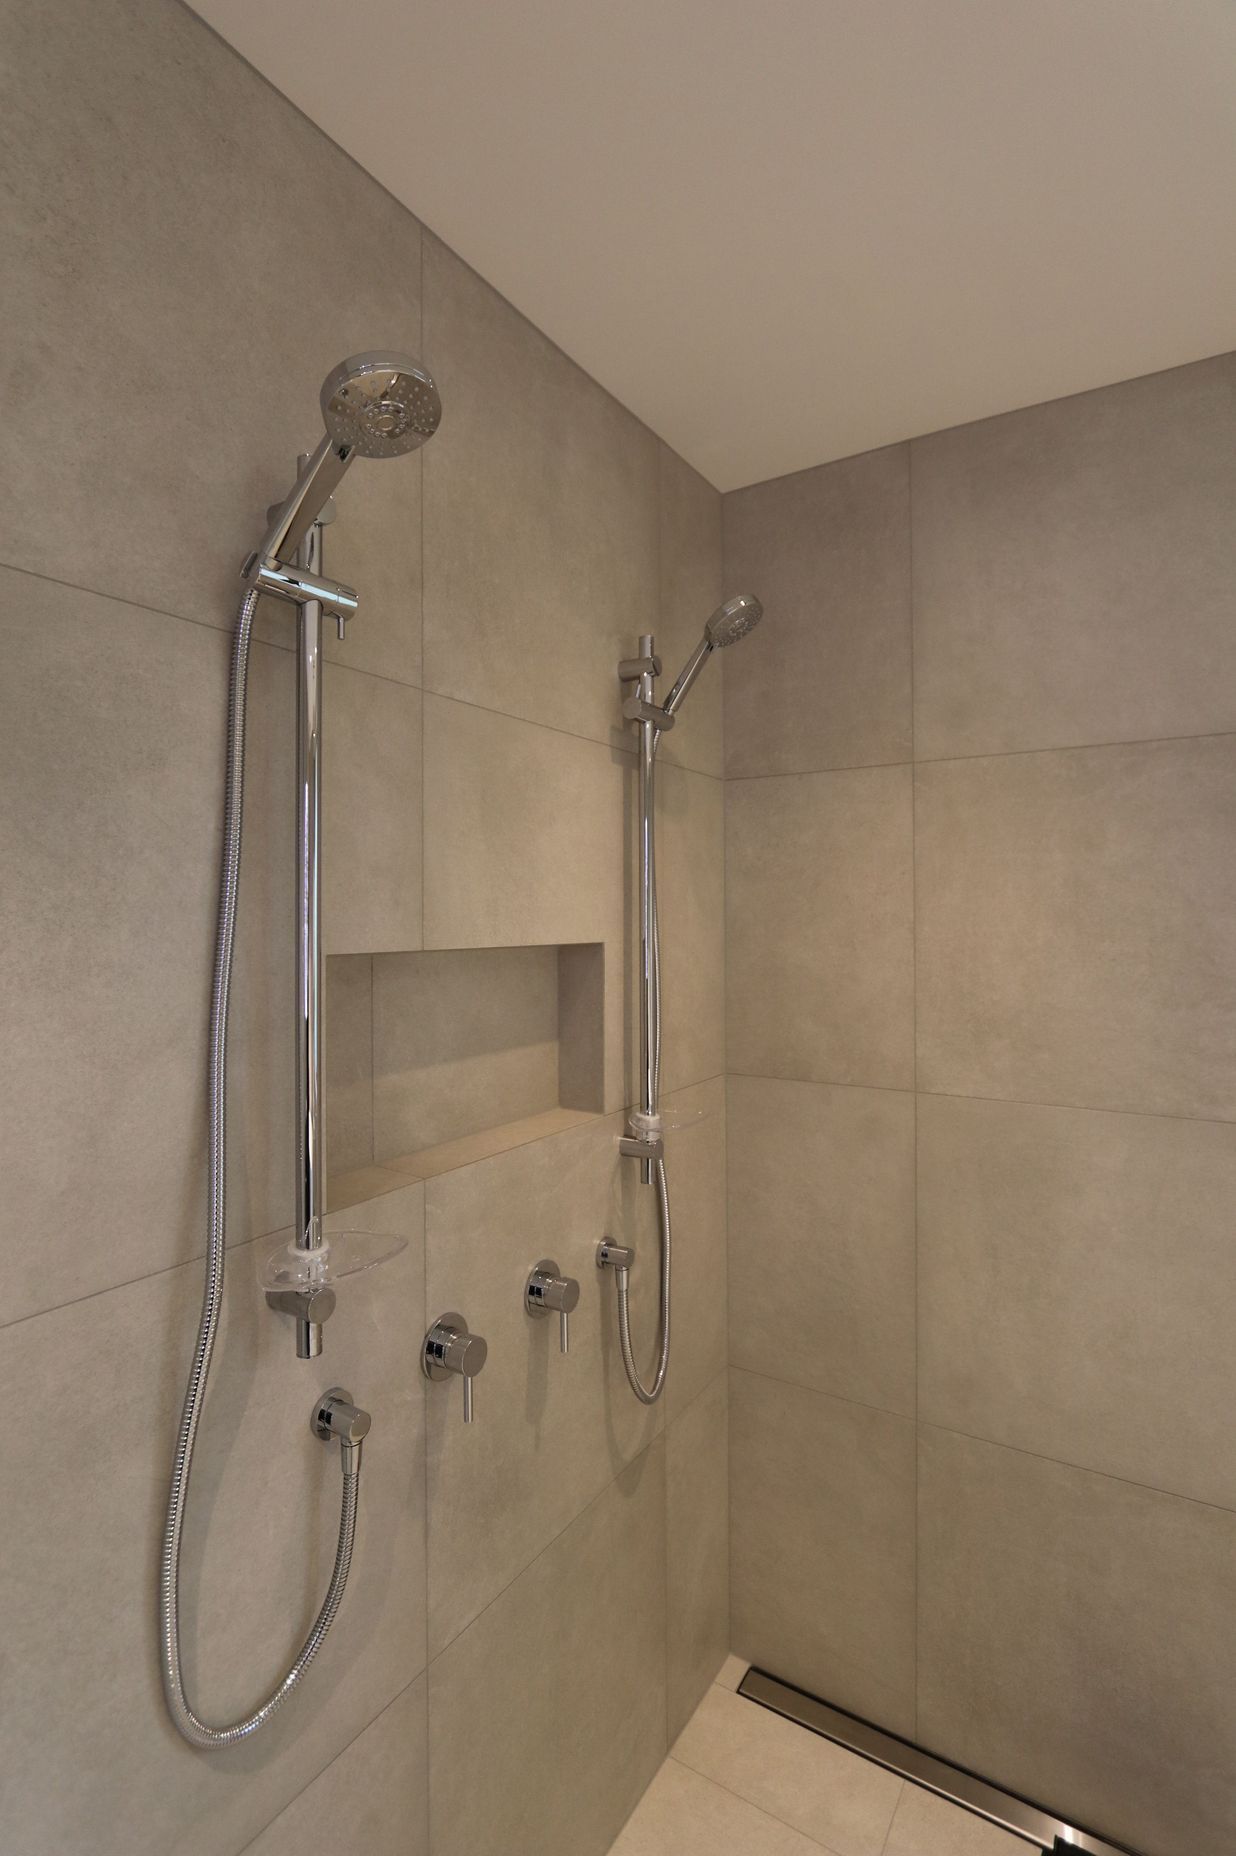 Large double shower in the main bathroom with a discreet channel drain.